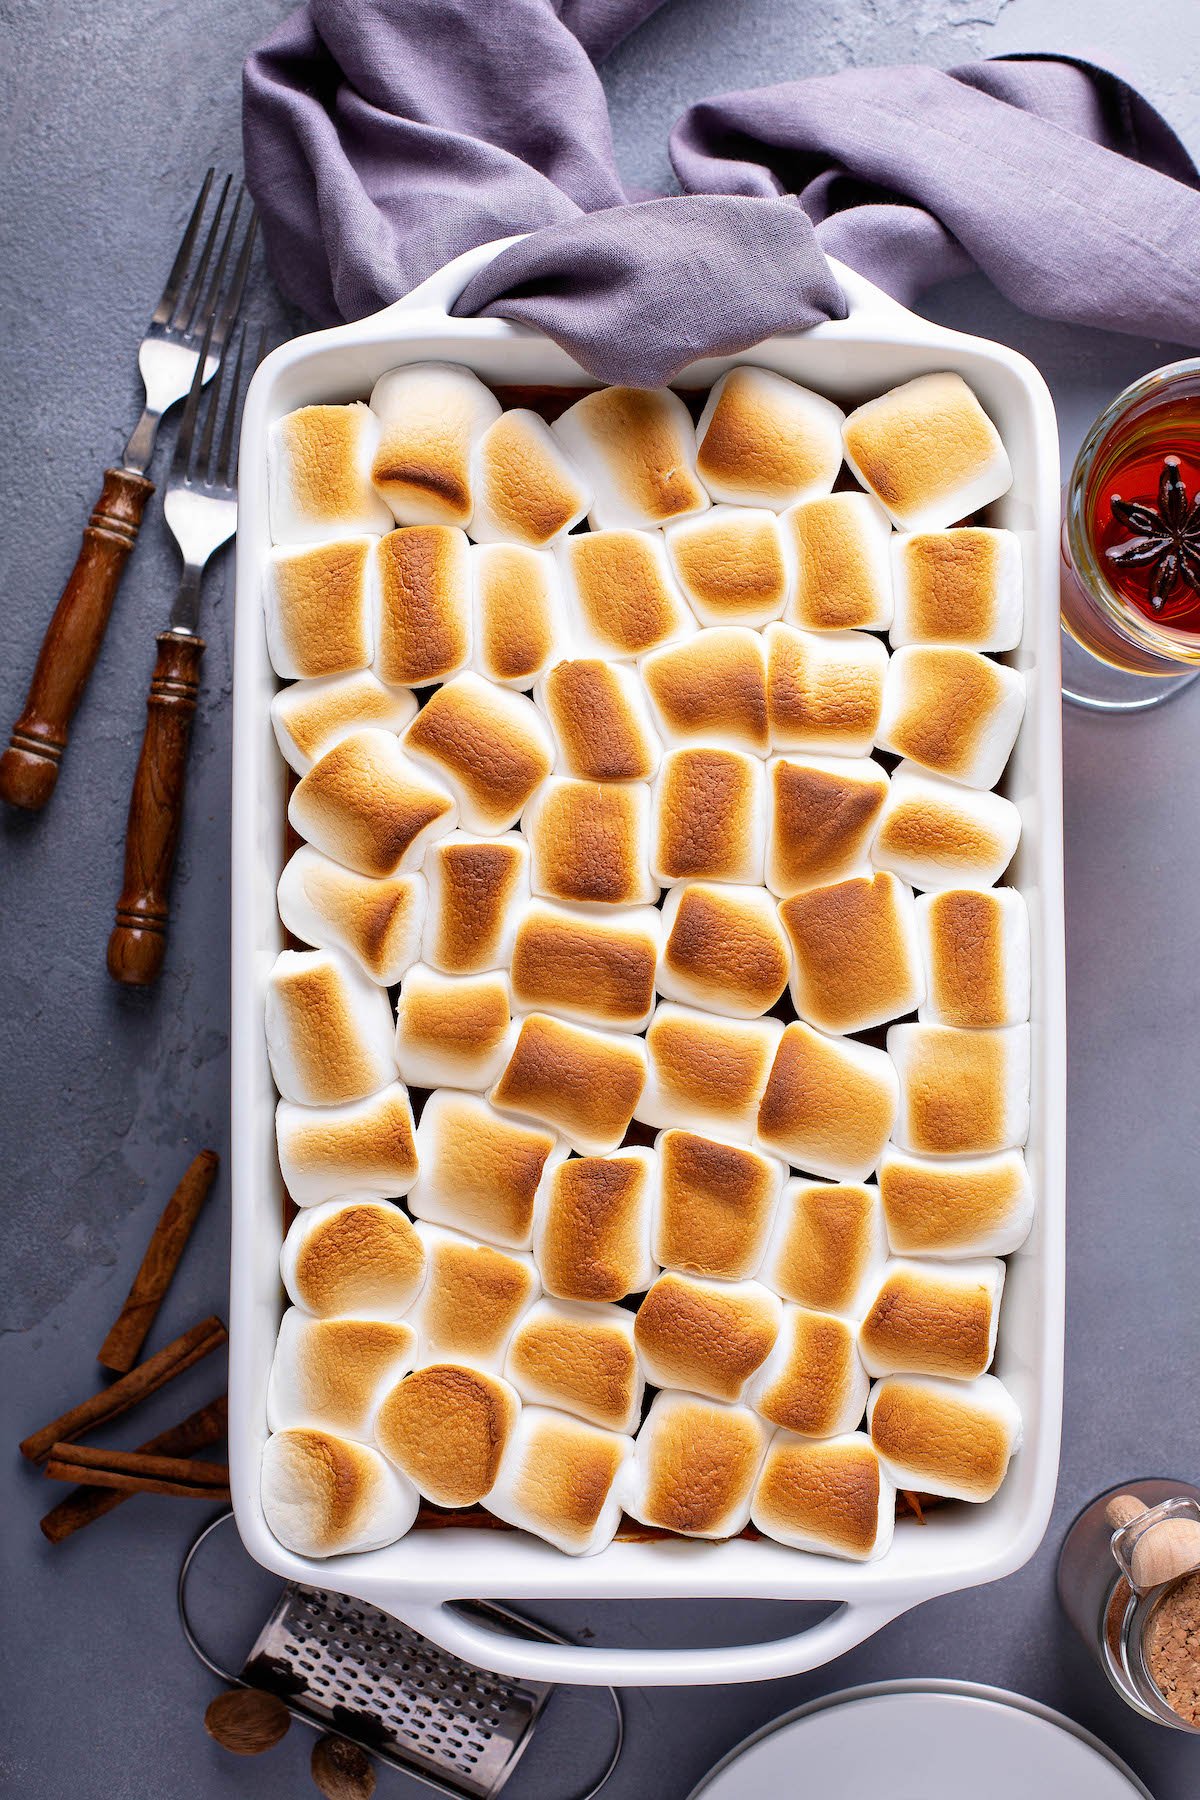 Toasted marshmallows layered on top of sweet potatoes in a casserole dish.